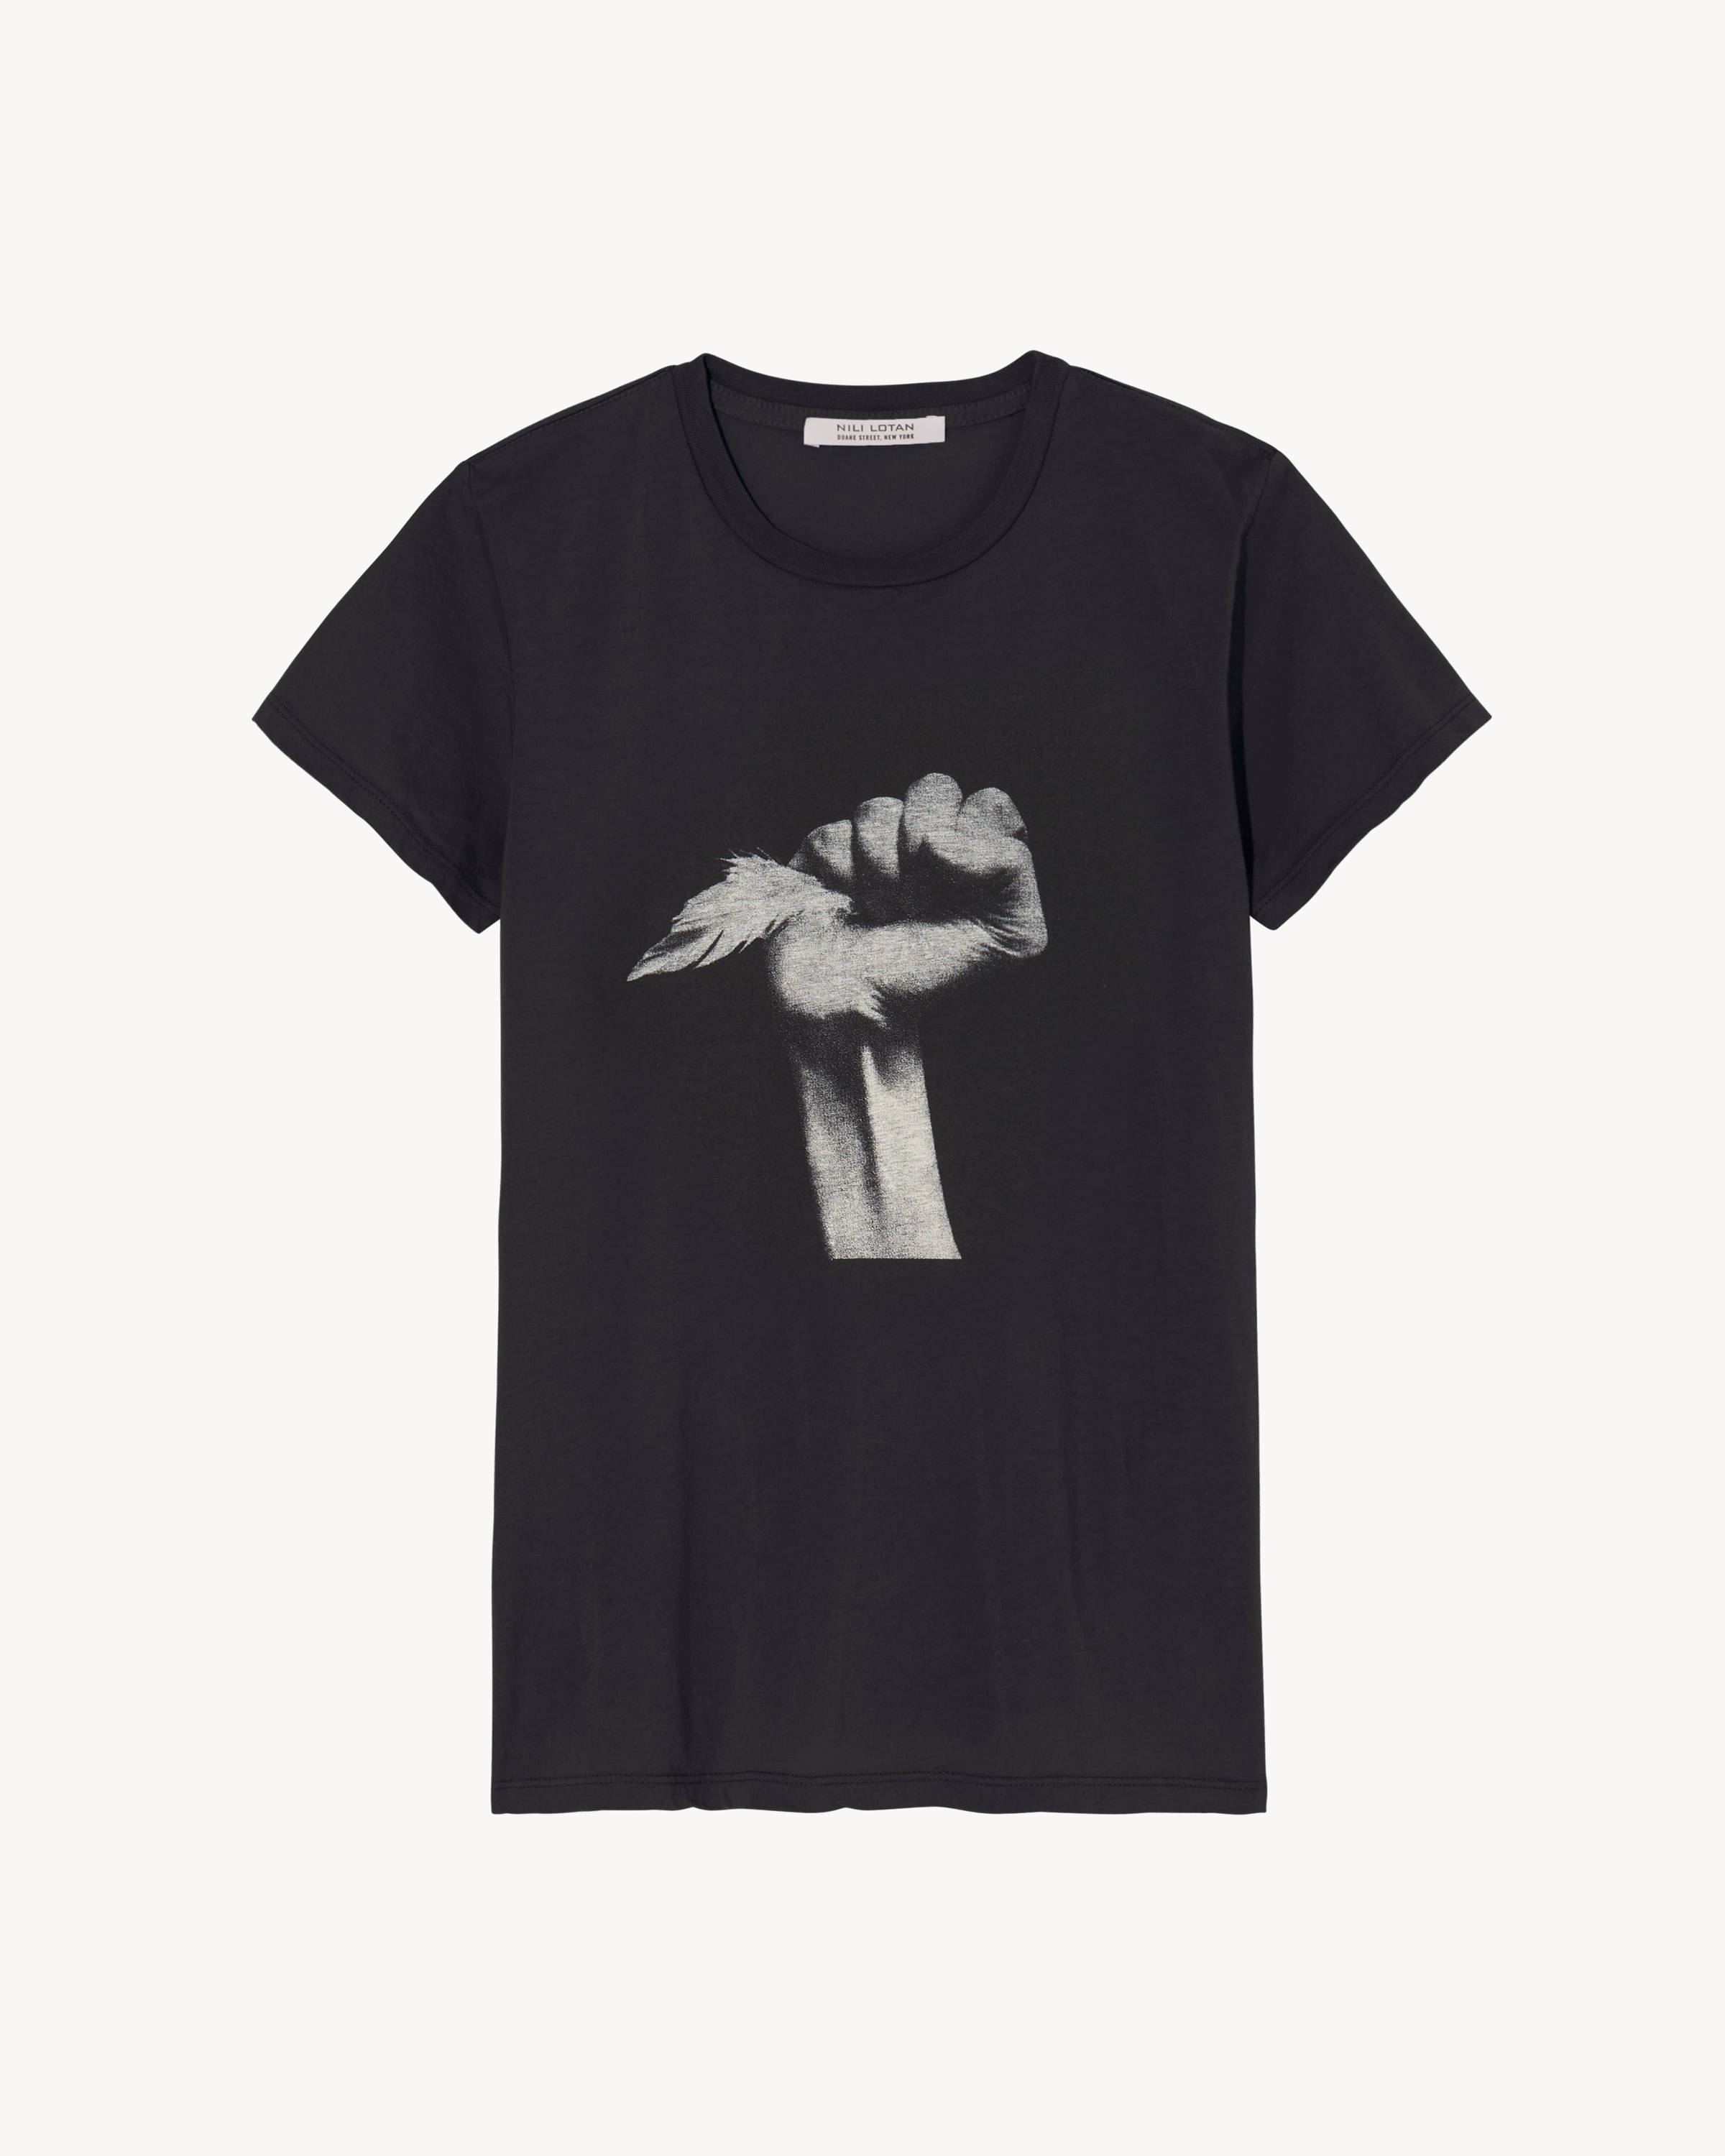 A black tee with a black and white image of a hand holding a feather.